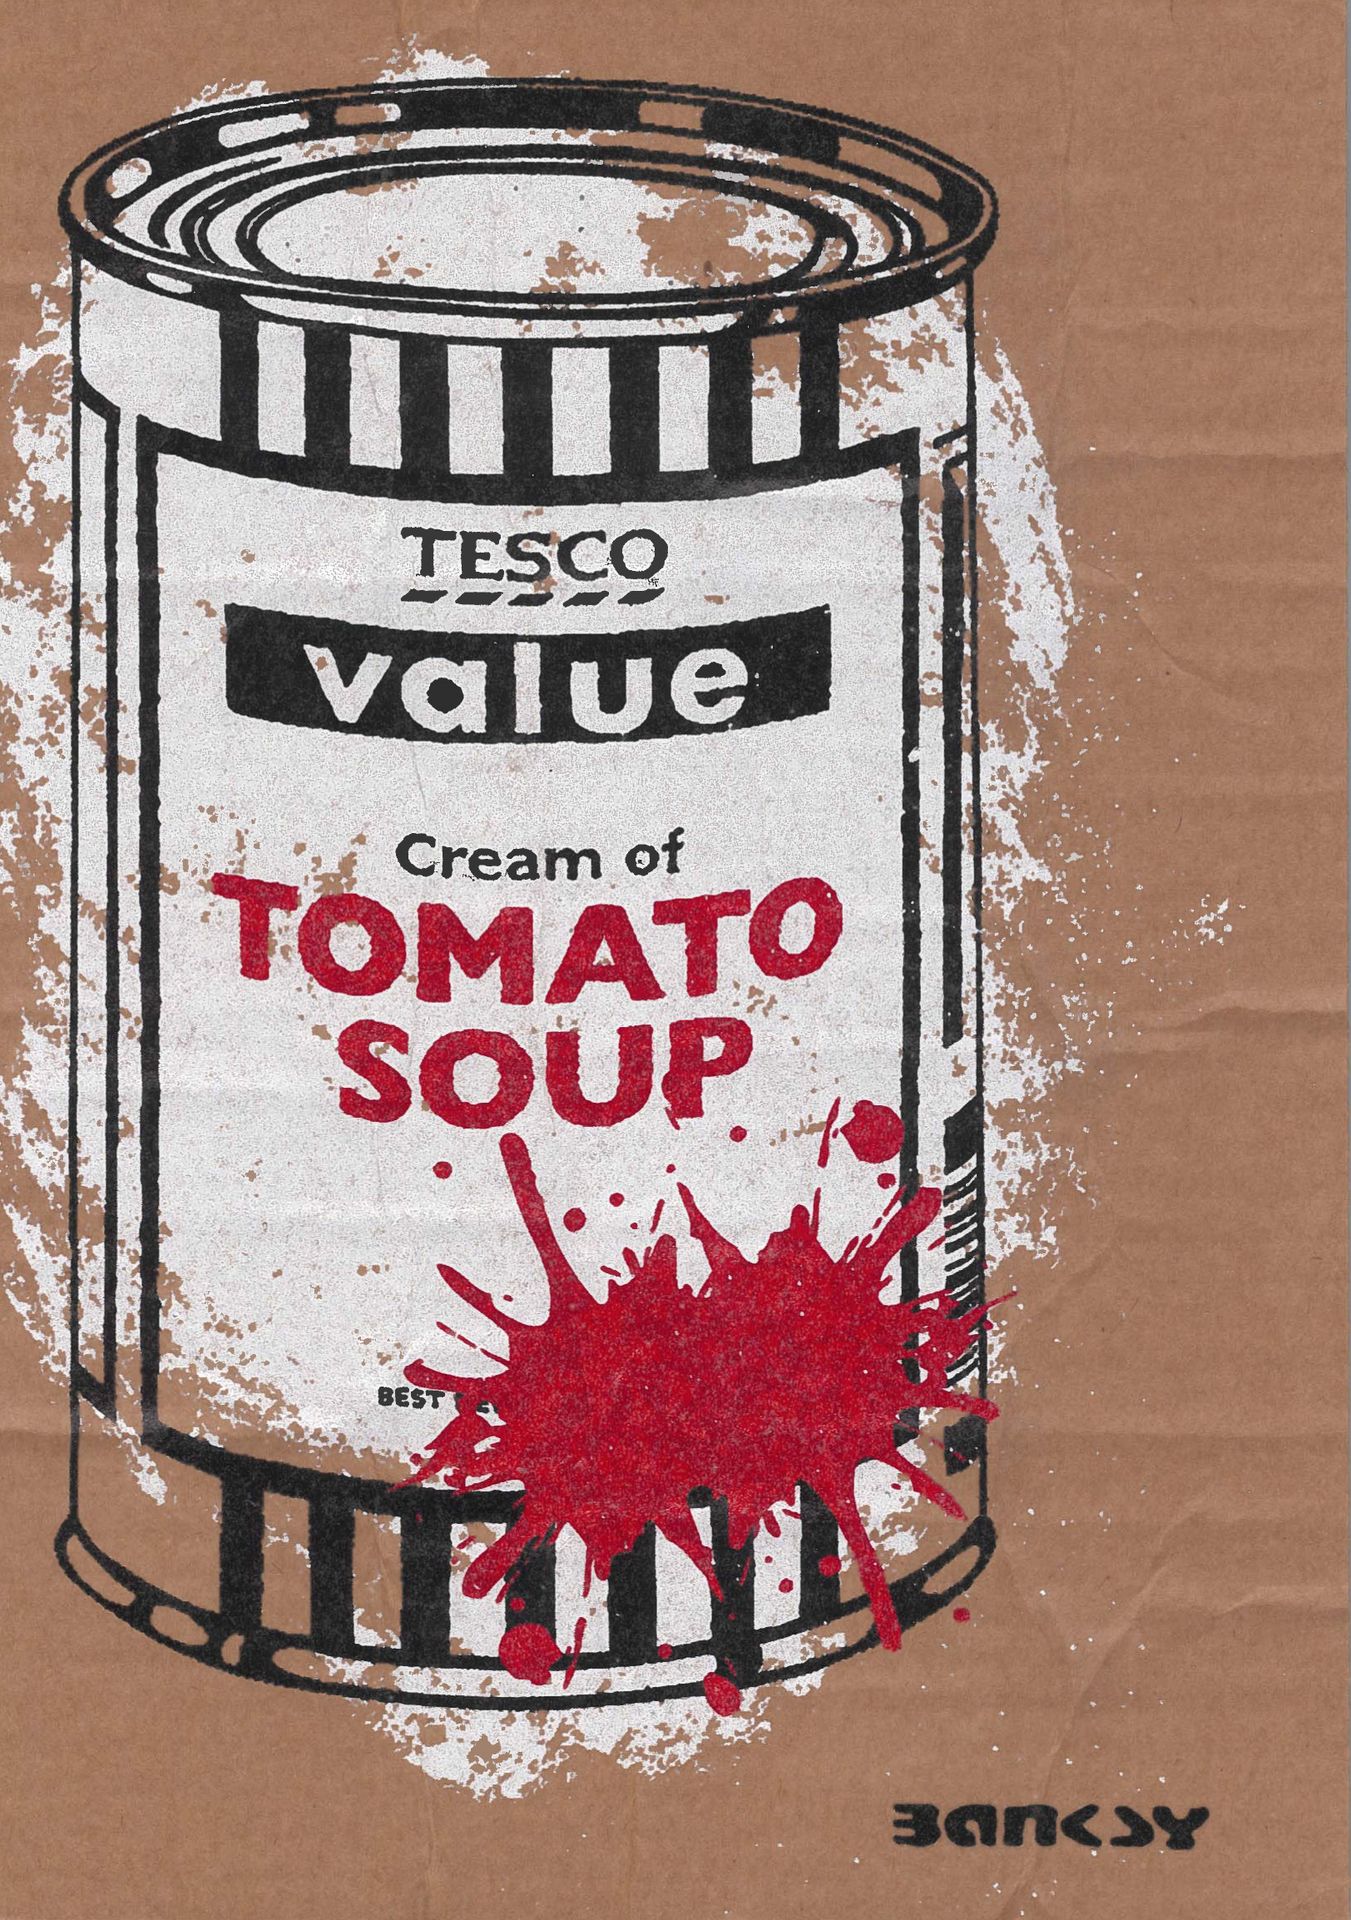 Null BANKSY DISMALAND (From)

Tomato Soup can

Aerosol spray and stencil on card&hellip;